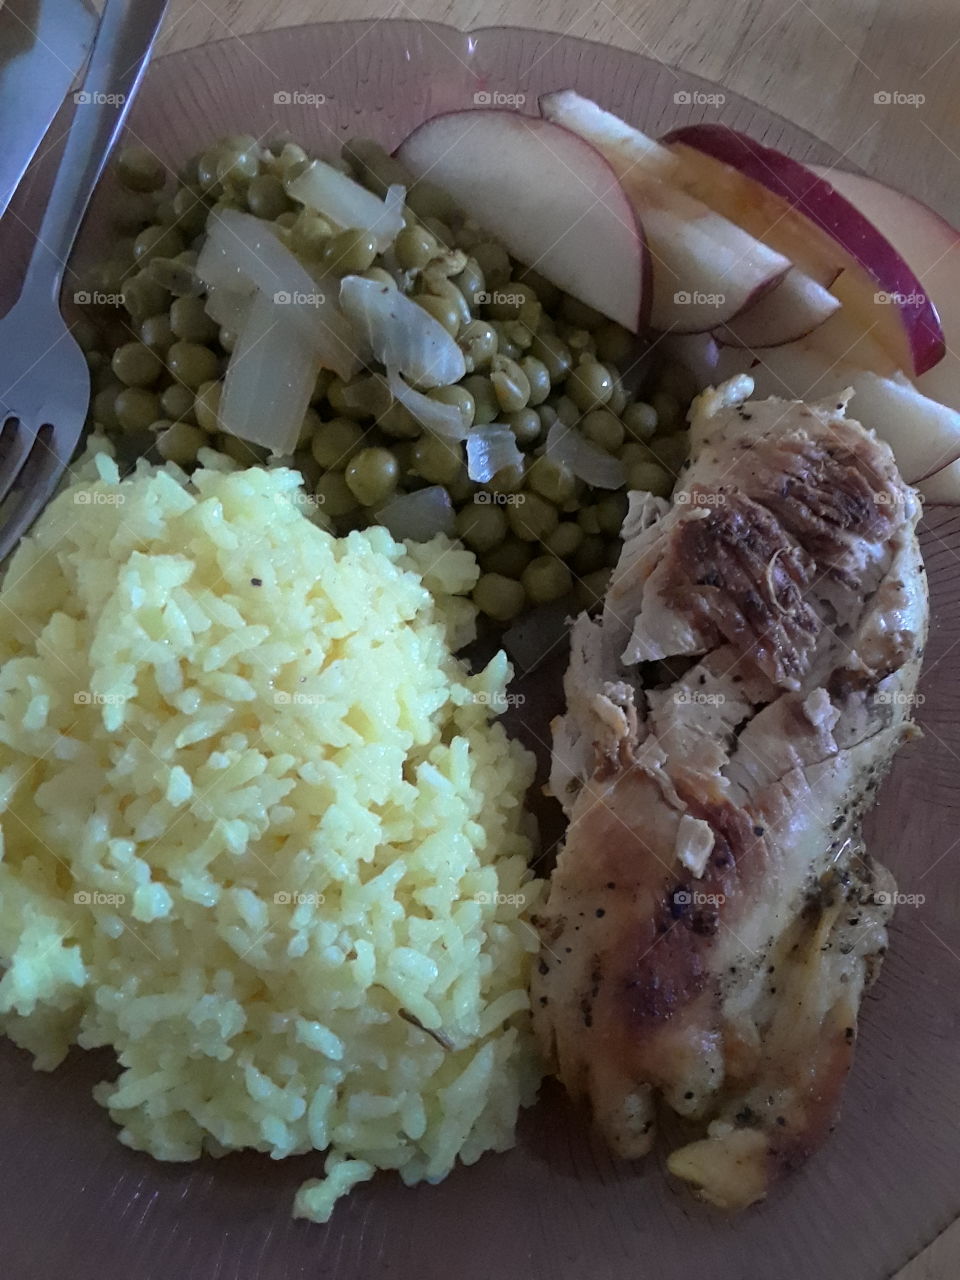 Grilled Chicken , ricewith turmic, peas and onions, sliced apples